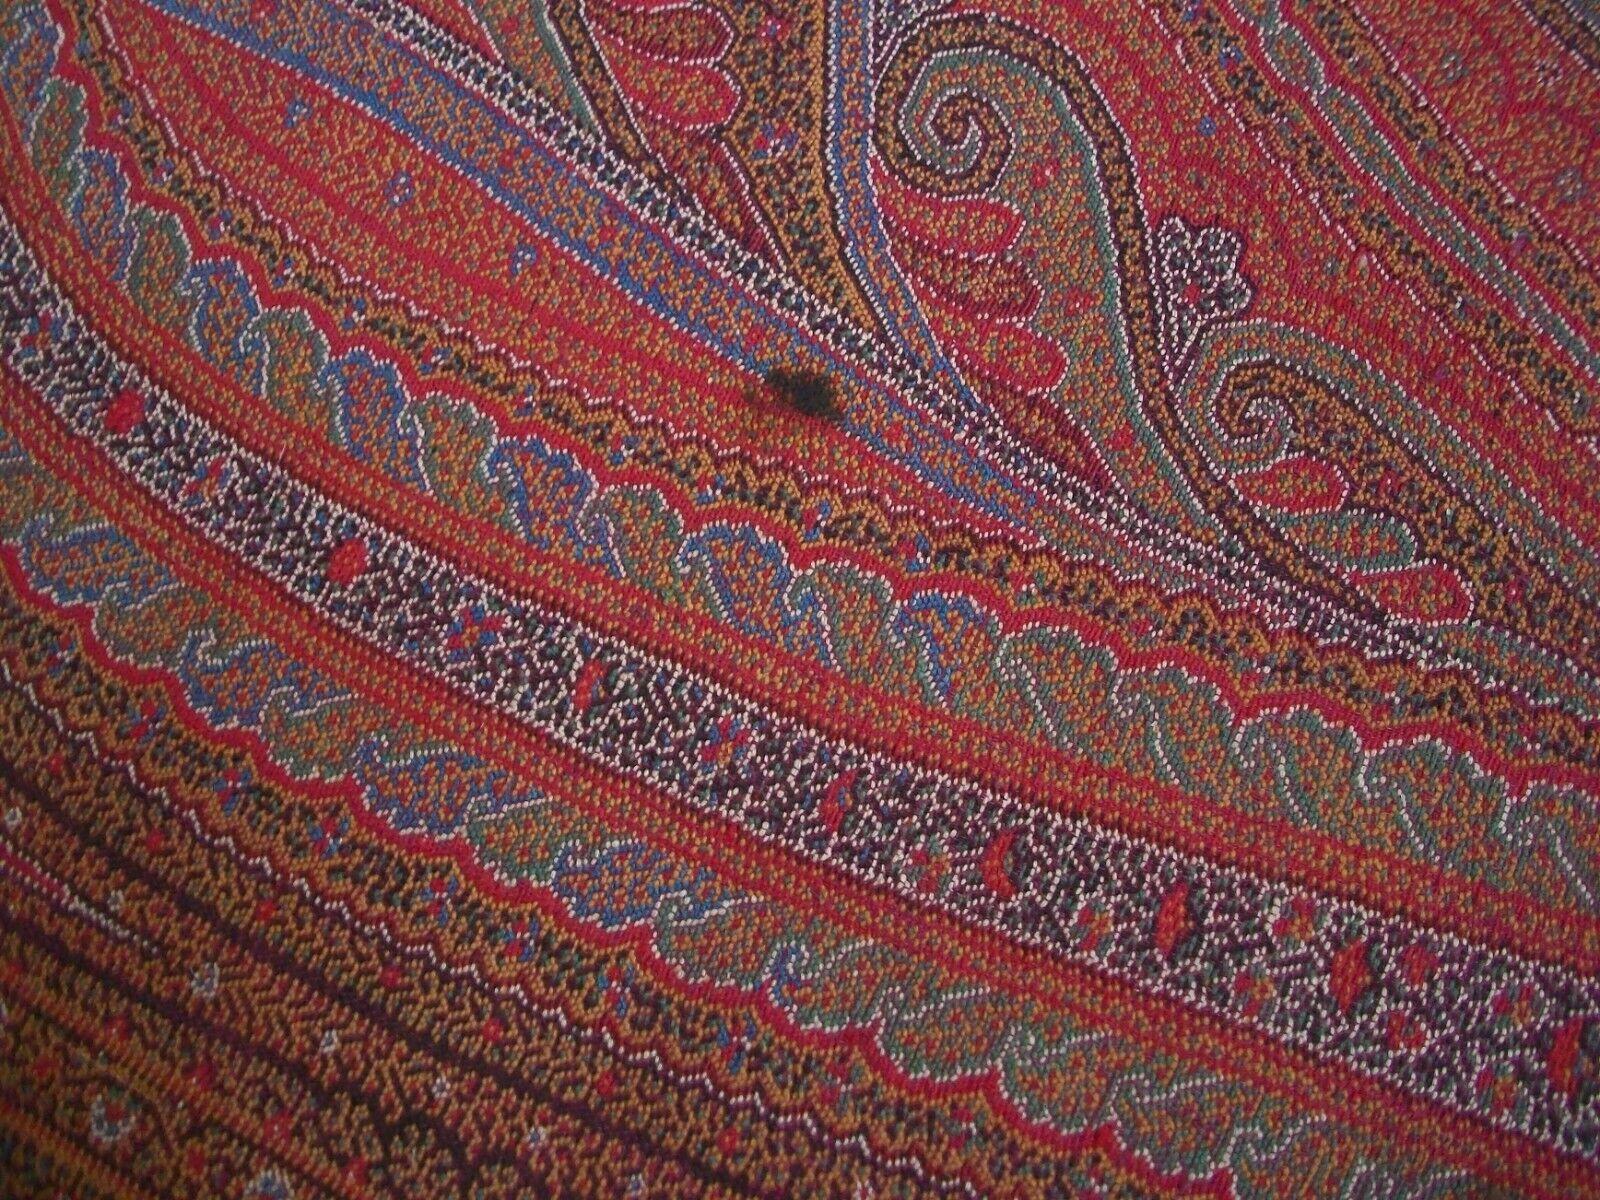 Wool Antique Victorian Paisley Shawl, Fine Weave, circa 1850's For Sale